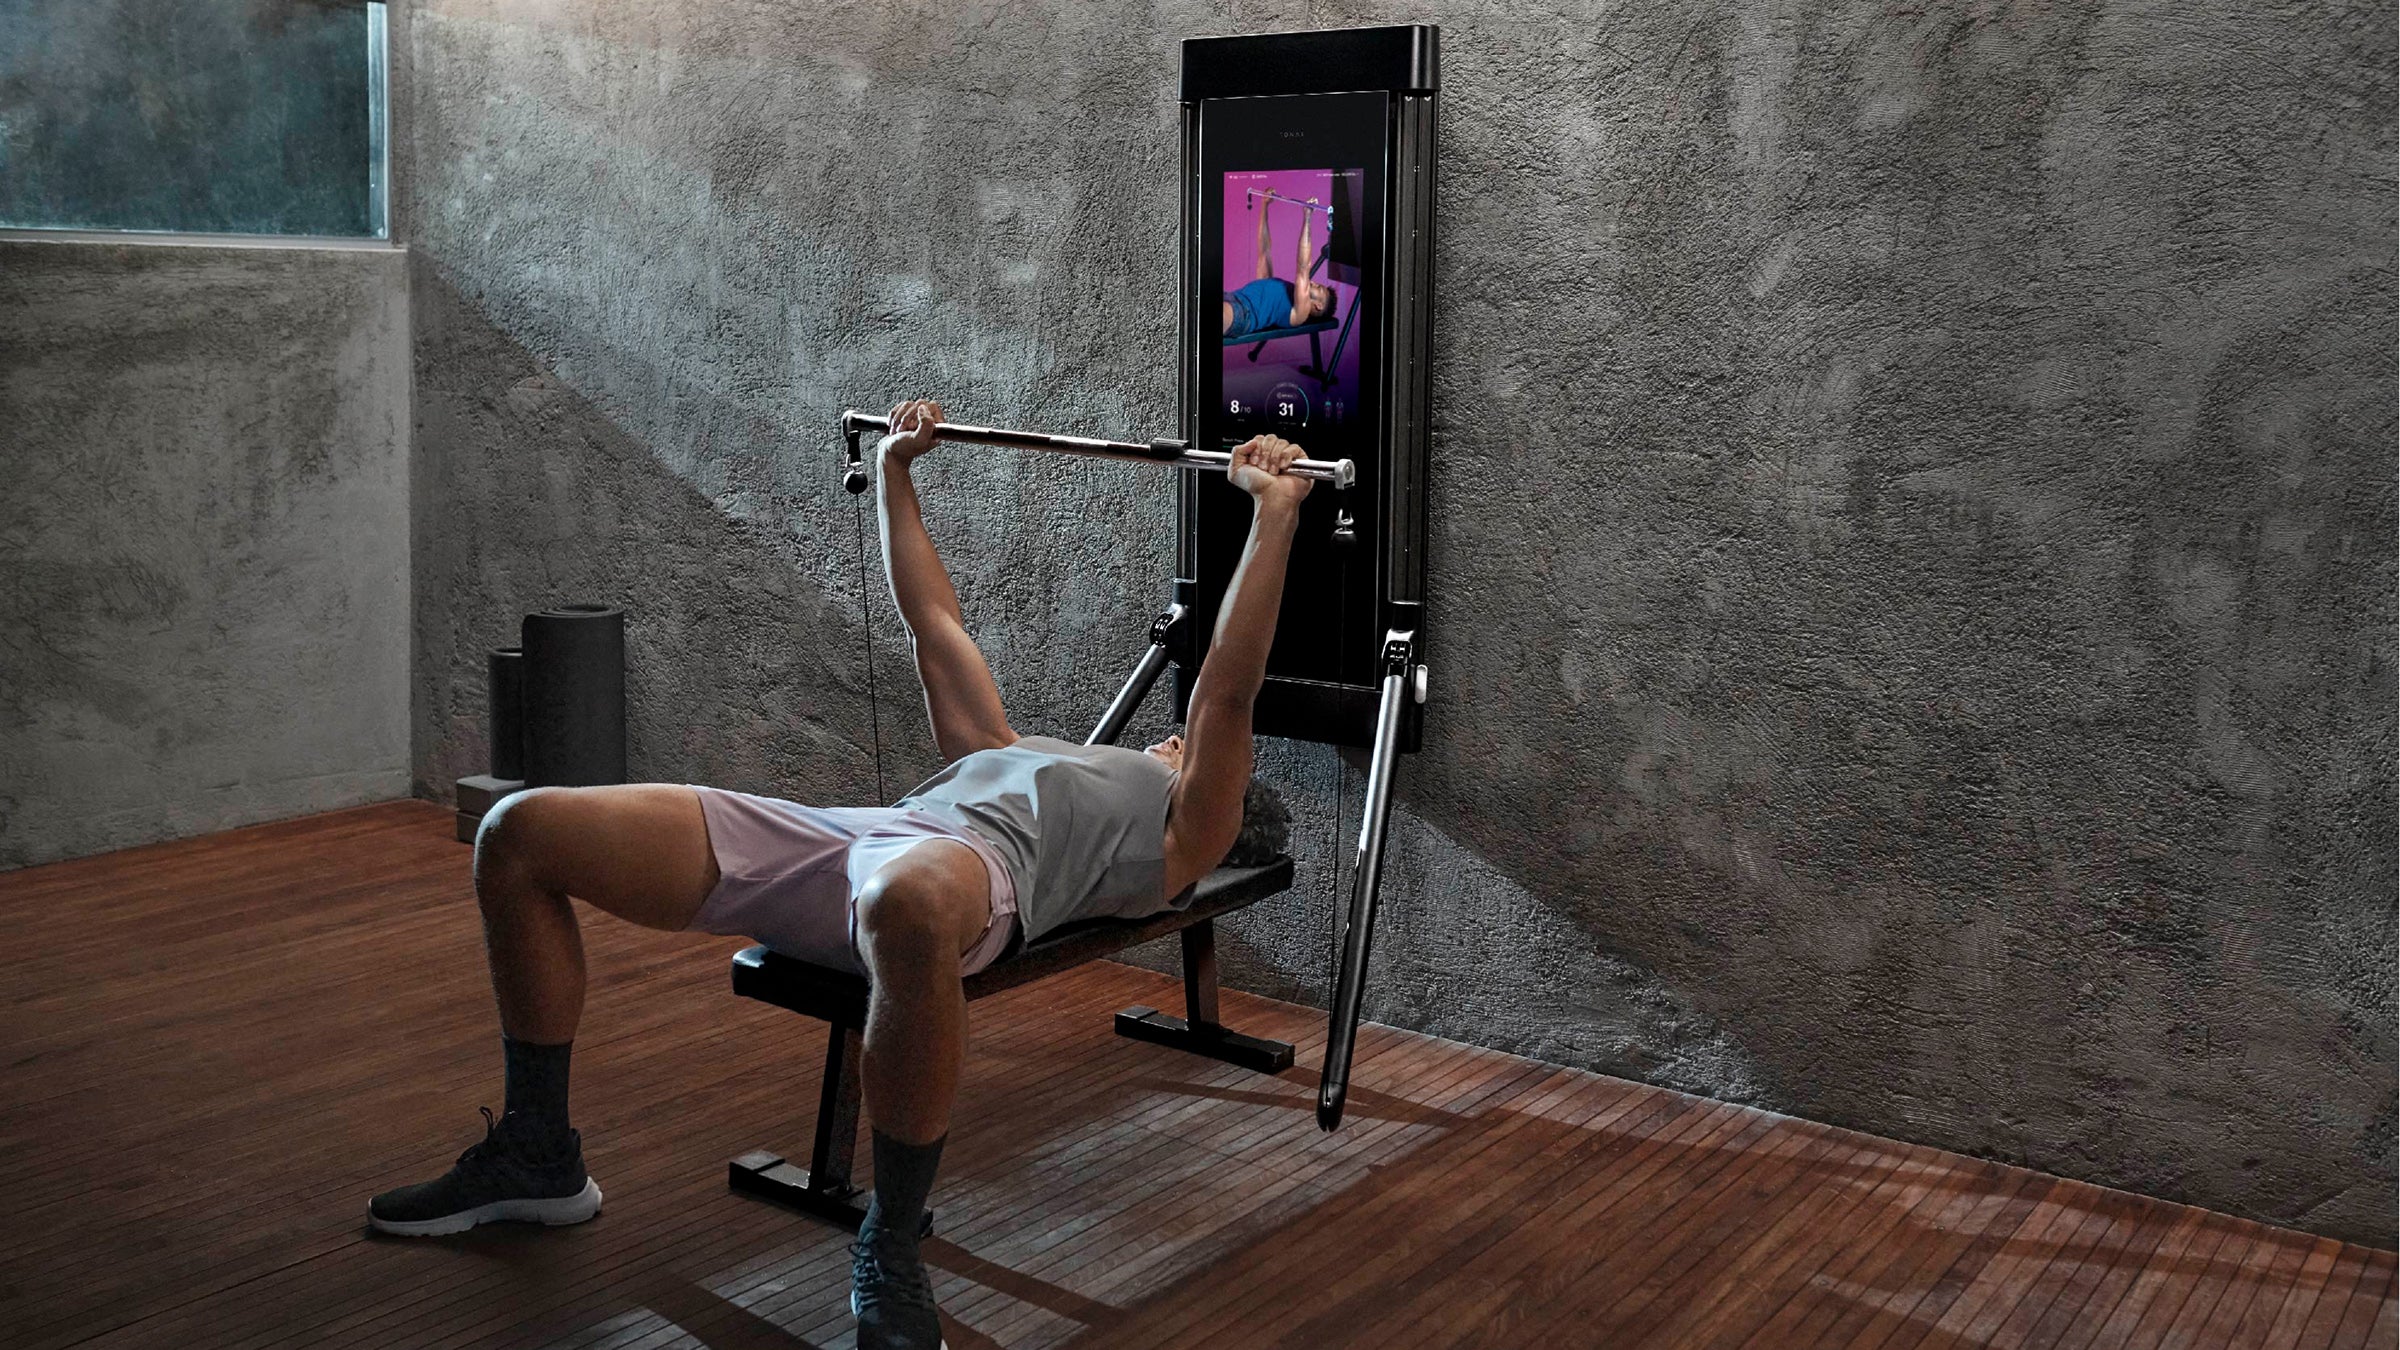 Get Fit Without Fuss: How to Create a Home Gym